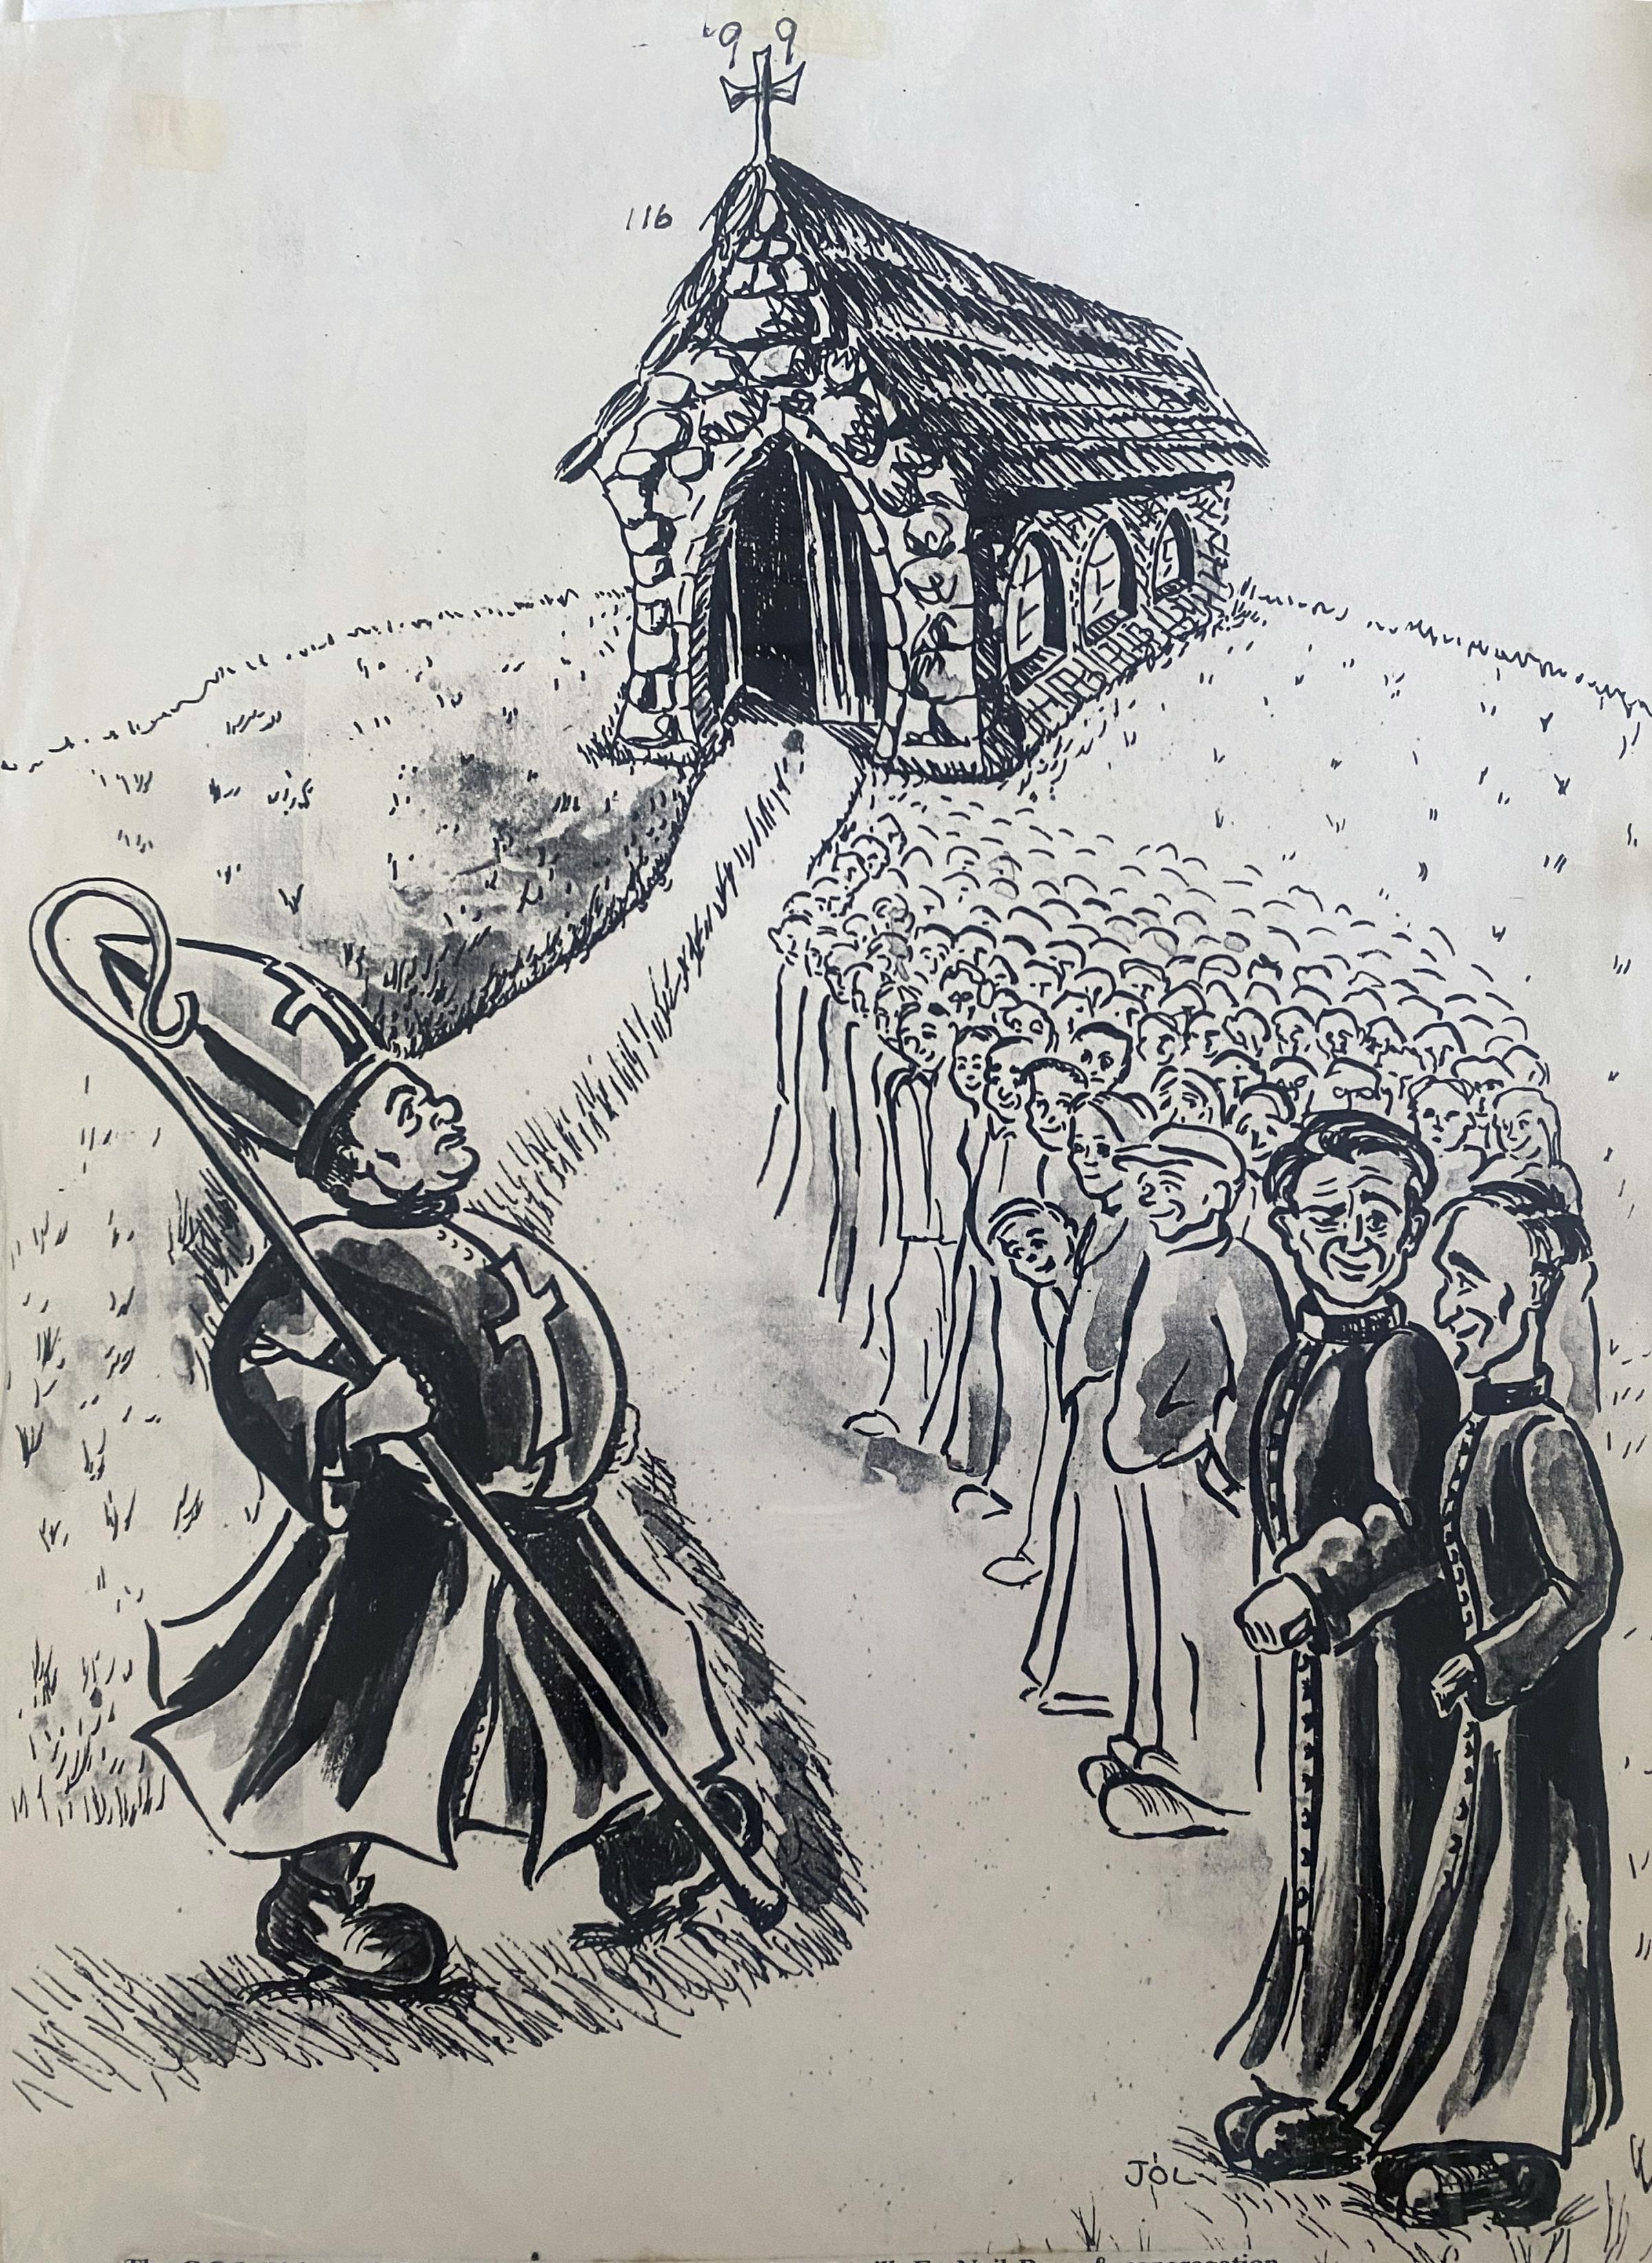 This drawing by Jane OLoughlin pays tribute to the amusing incident when a visiting Church of Ireland Bishop of Clogher was greeted by Rev. James B. Tuthill and his friend, Fr. Neal Ryan - whose Catholic congegration had came along with him, and